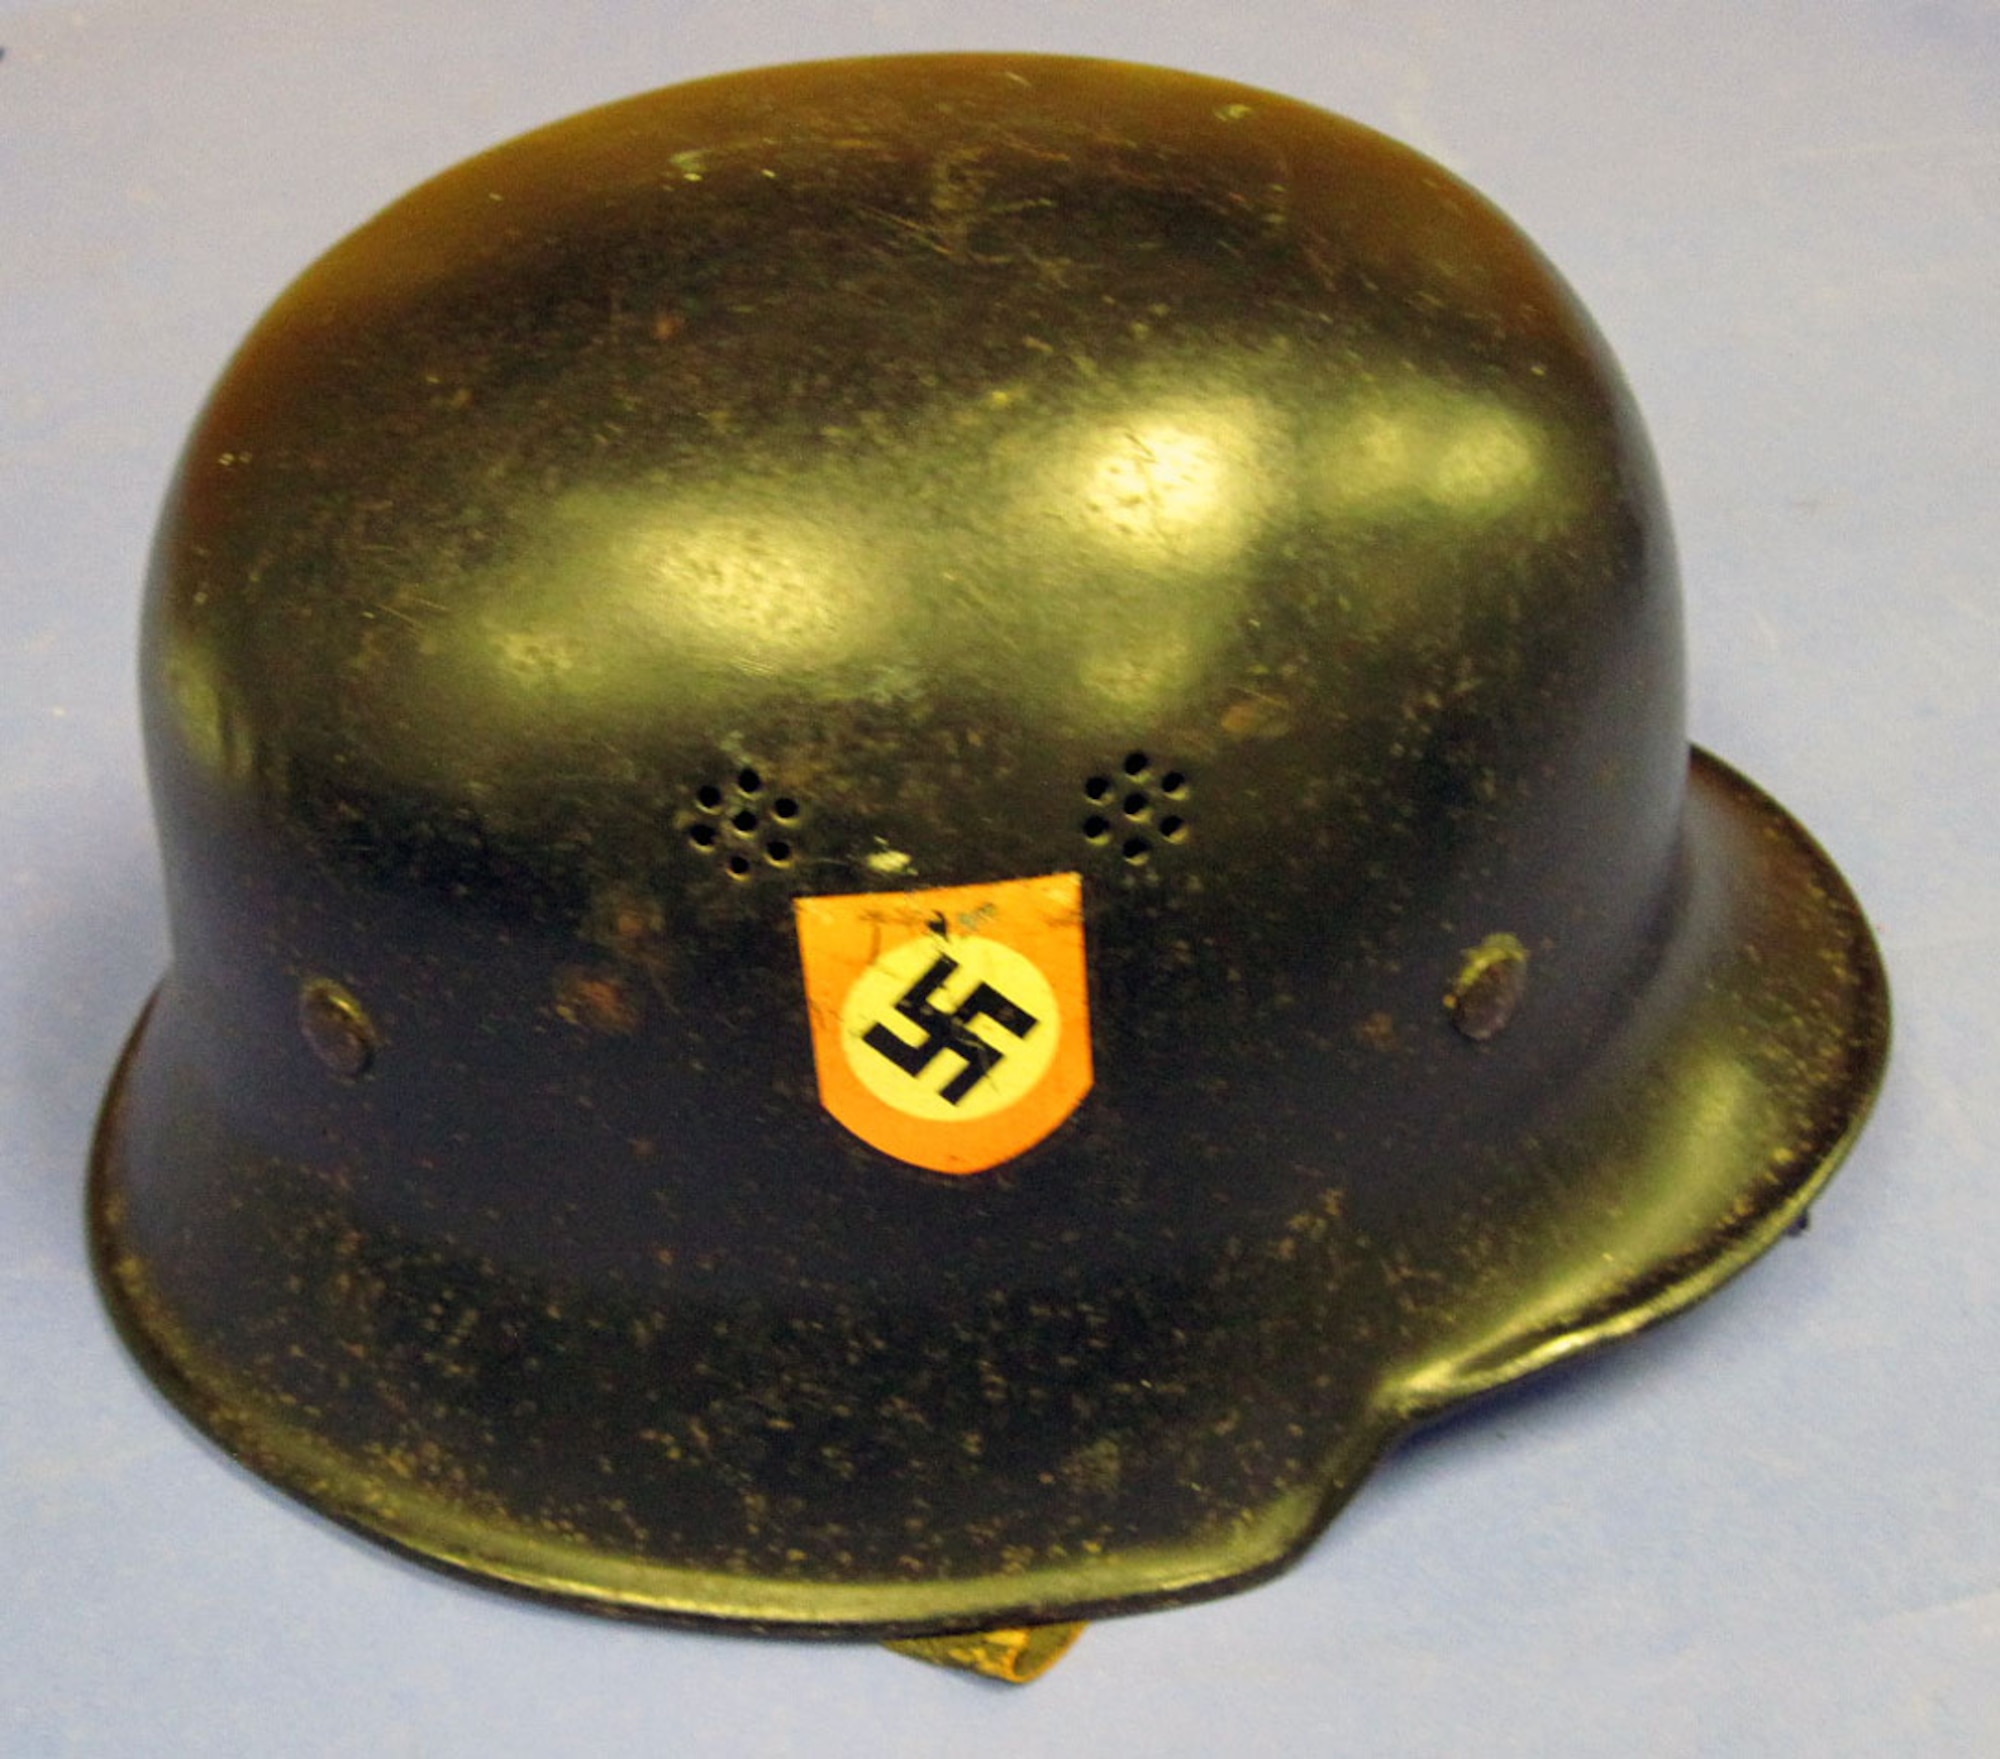 This helmet has the German police (Deutsch Polizei) and National Socialist Party (Nazi) decals and includes a leather neck cover. The German Police used this type of light-weight helmet during regular duty in hazardous situations. (U.S. Air Force photo)